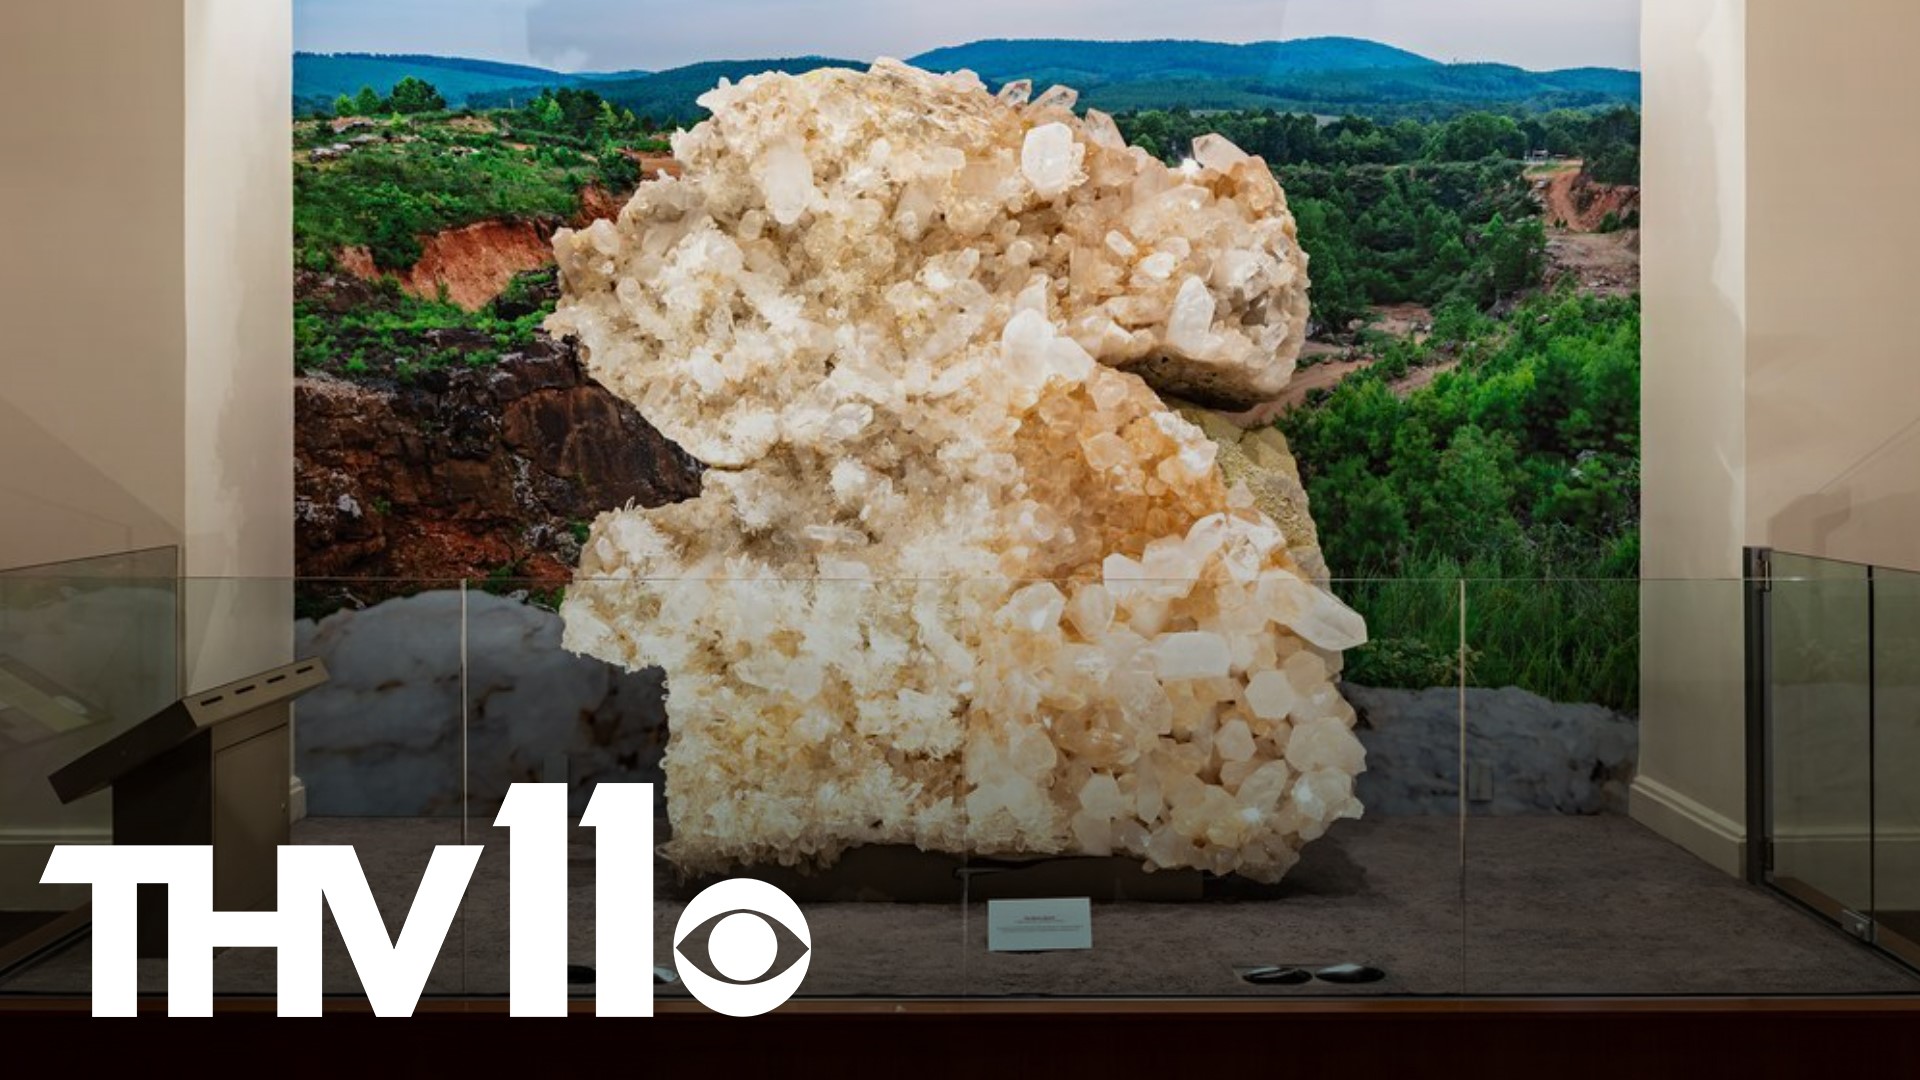 The quartz was discovered at the Coleman Mine in Arkansas’ Ouachita Mountains in 2016.